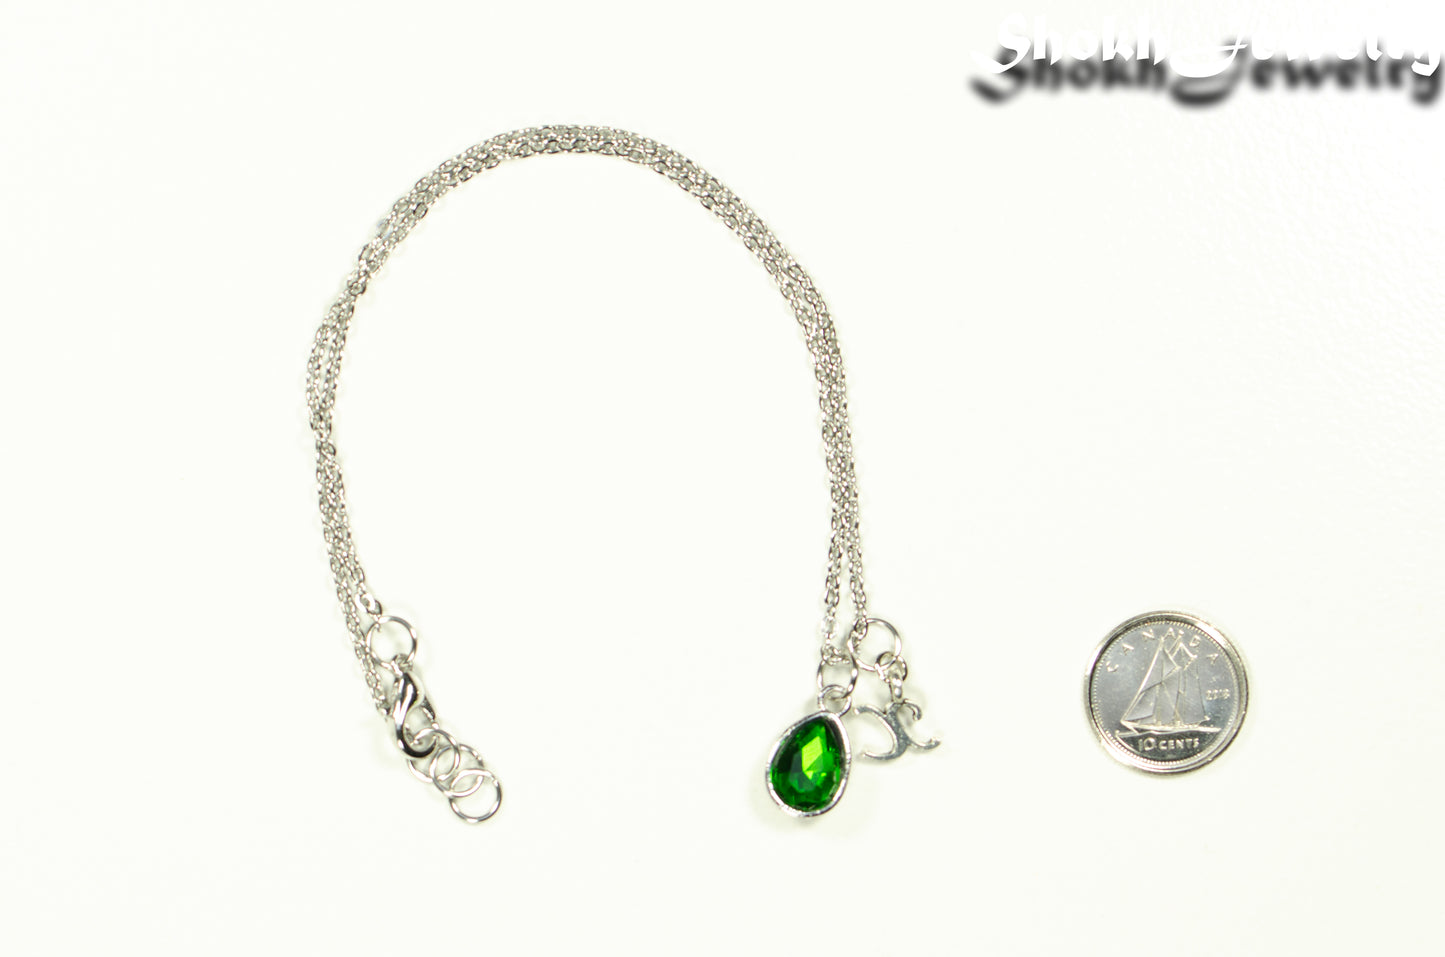 Small Personalized May Birthstone Choker Necklace beside a dime.